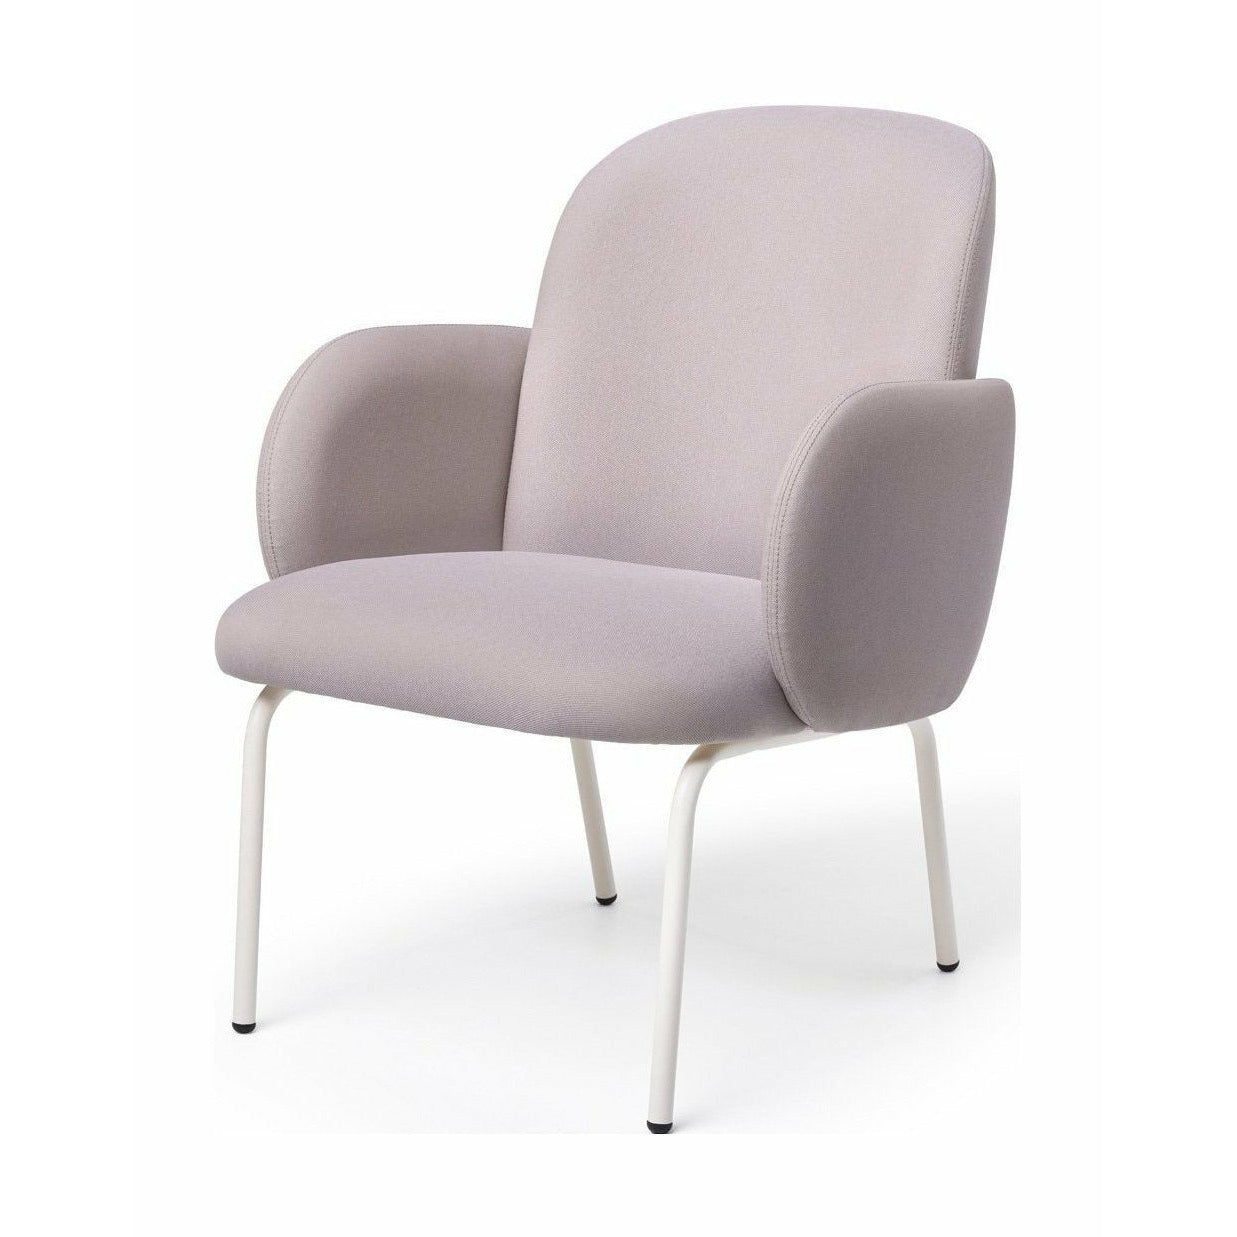 Puik Dost Lounge Chair Steel, Lilac Grey